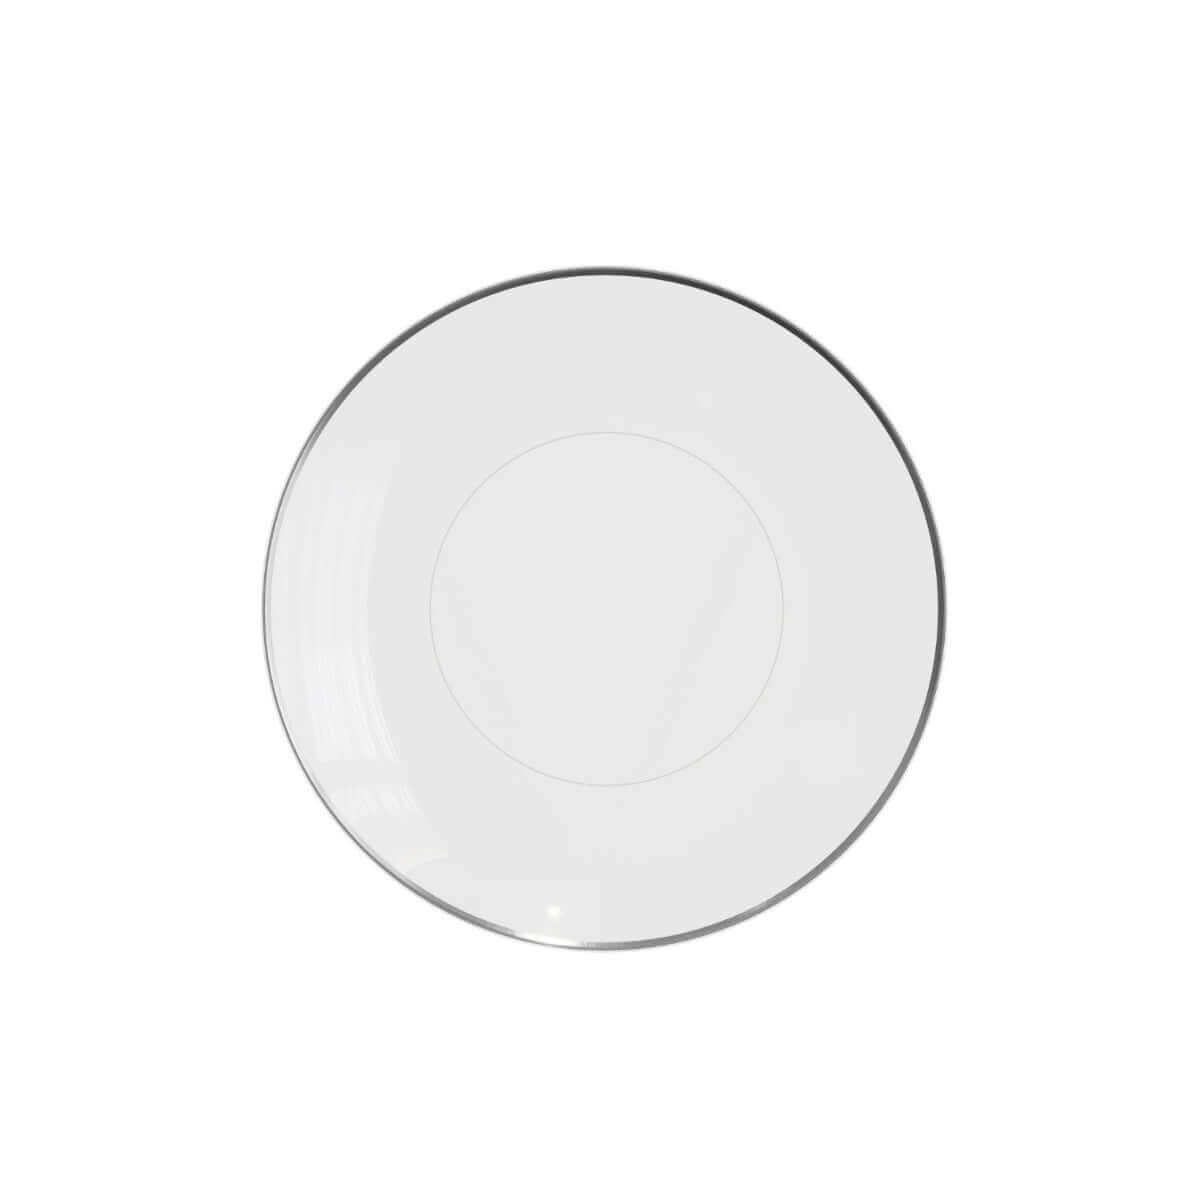 6" Clear With Silver Rim Plastic Plates (40 Count) - Yom Tov Settings